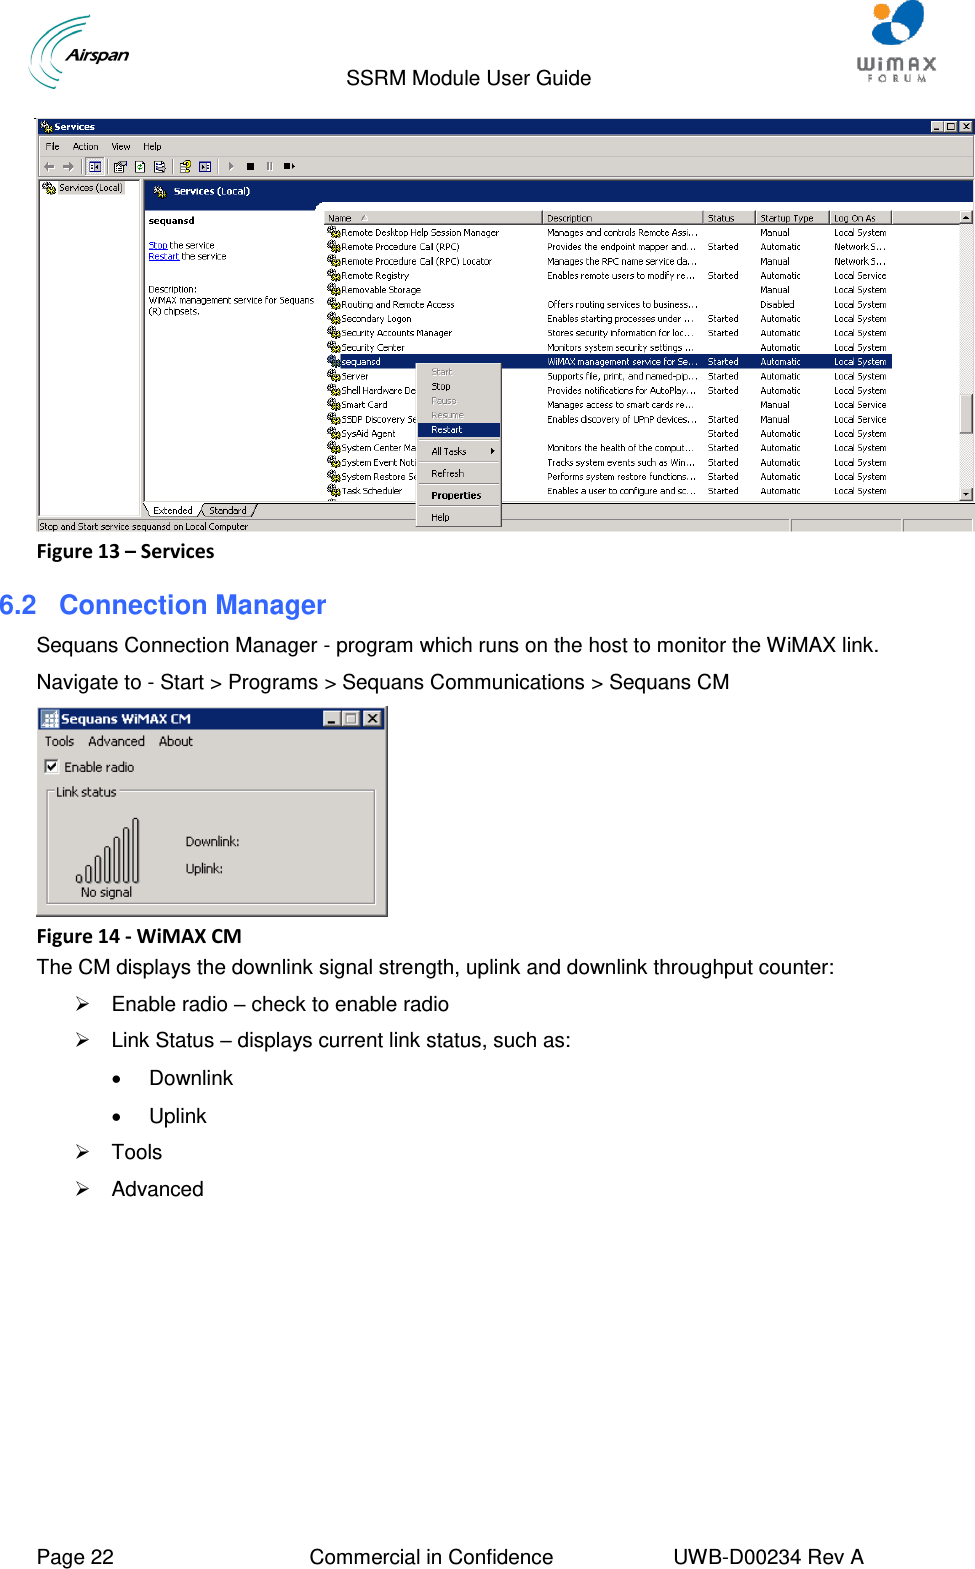                                  SSRM Module User Guide     Page 22  Commercial in Confidence  UWB-D00234 Rev A     Figure 13 – Services 6.2 Connection Manager Sequans Connection Manager - program which runs on the host to monitor the WiMAX link. Navigate to - Start &gt; Programs &gt; Sequans Communications &gt; Sequans CM  Figure 14 - WiMAX CM The CM displays the downlink signal strength, uplink and downlink throughput counter:   Enable radio  check to enable radio   Link Status  displays current link status, such as:   Downlink   Uplink   Tools   Advanced   